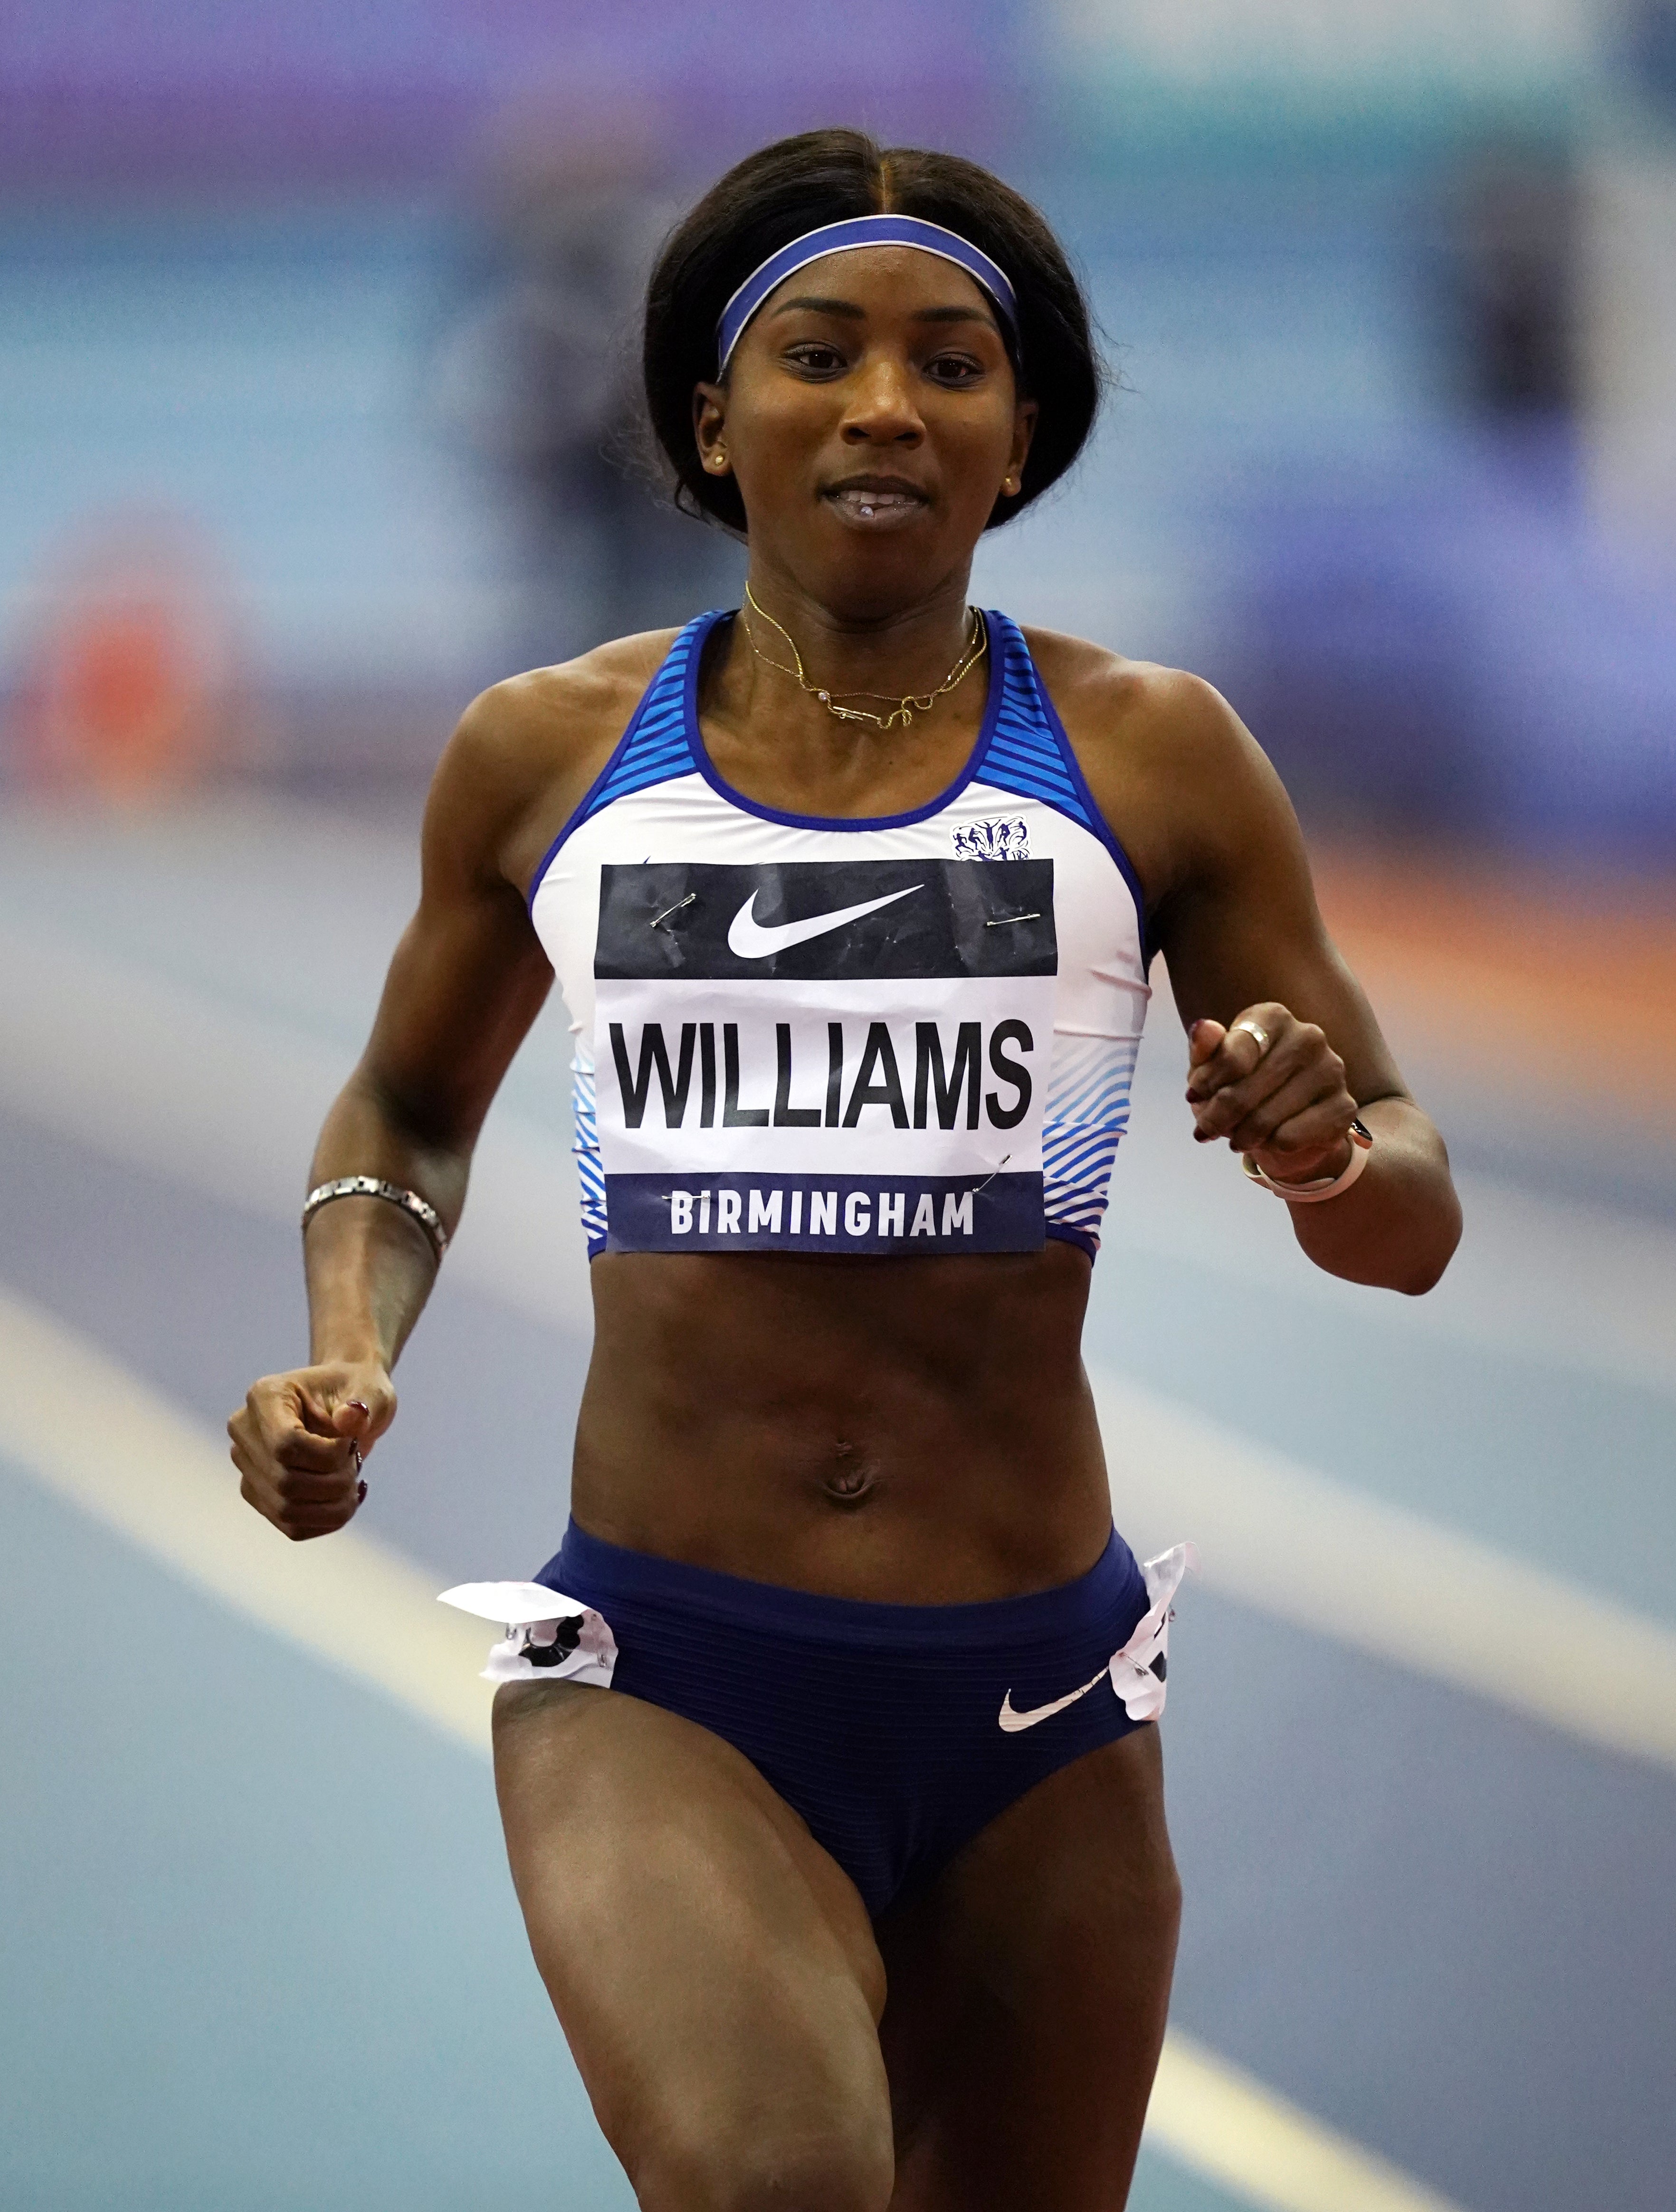 The controversial stop and search of athlete Bianca Williams and her partner as they drove through London with their baby prompted accusations of racial profiling (Martin Rickett/PA)